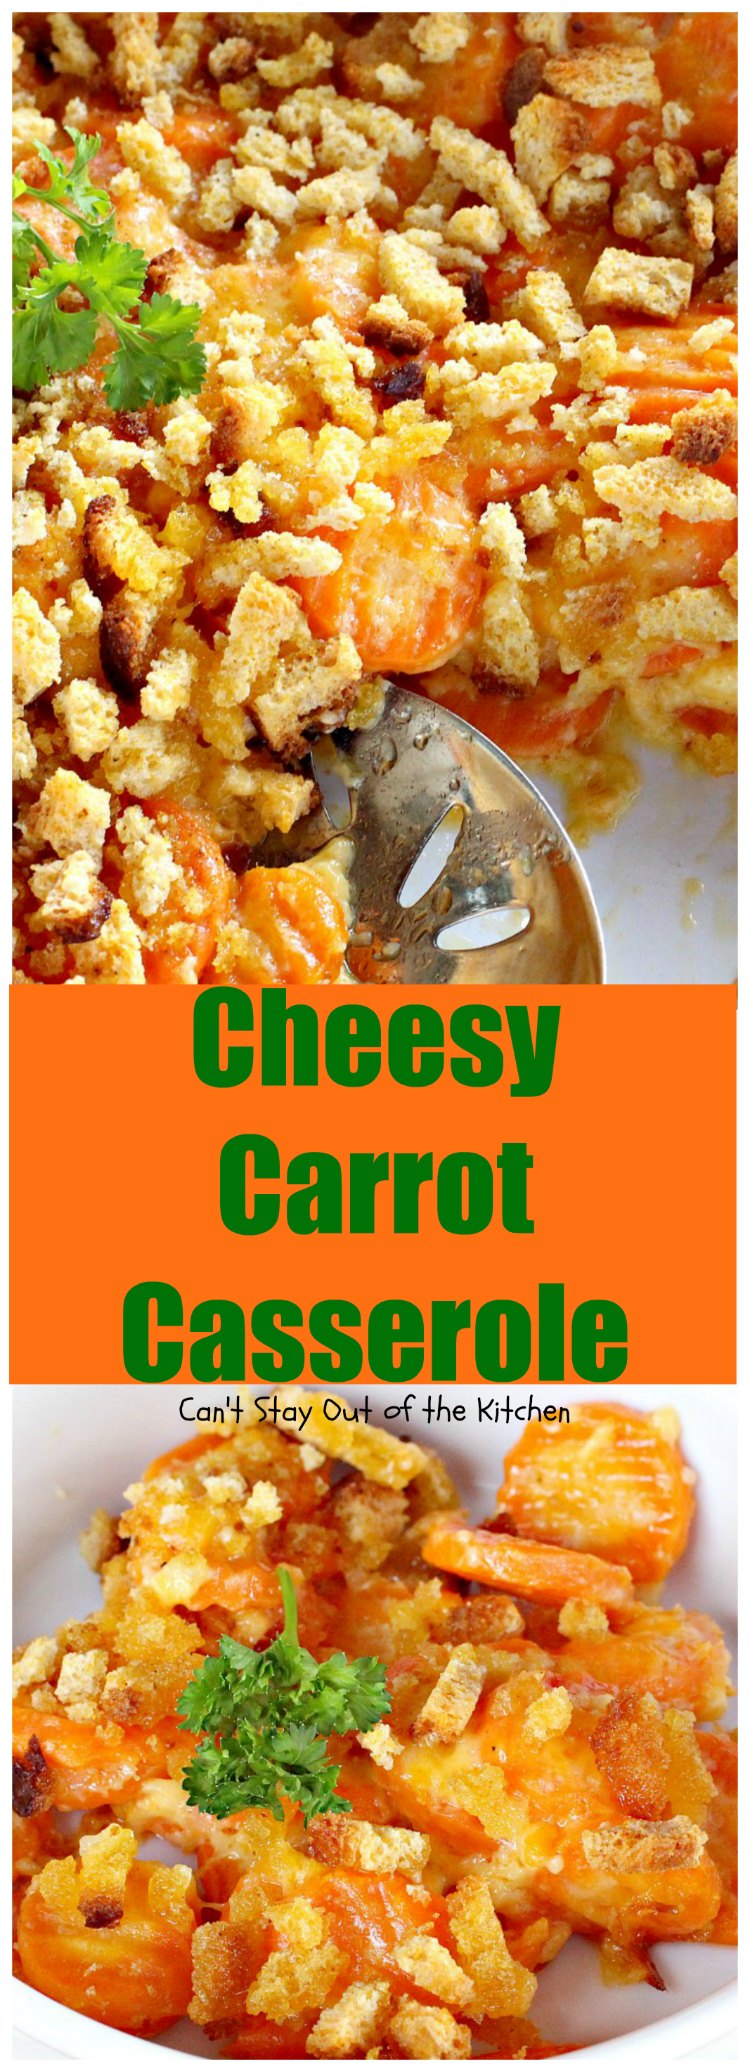 Cheesy Carrot Casserole | Can't Stay Out of the Kitchen | fantastic 5-ingredient recipe that's perfect for #holidays like #MothersDay or #Easter. Quick & easy. #carrots